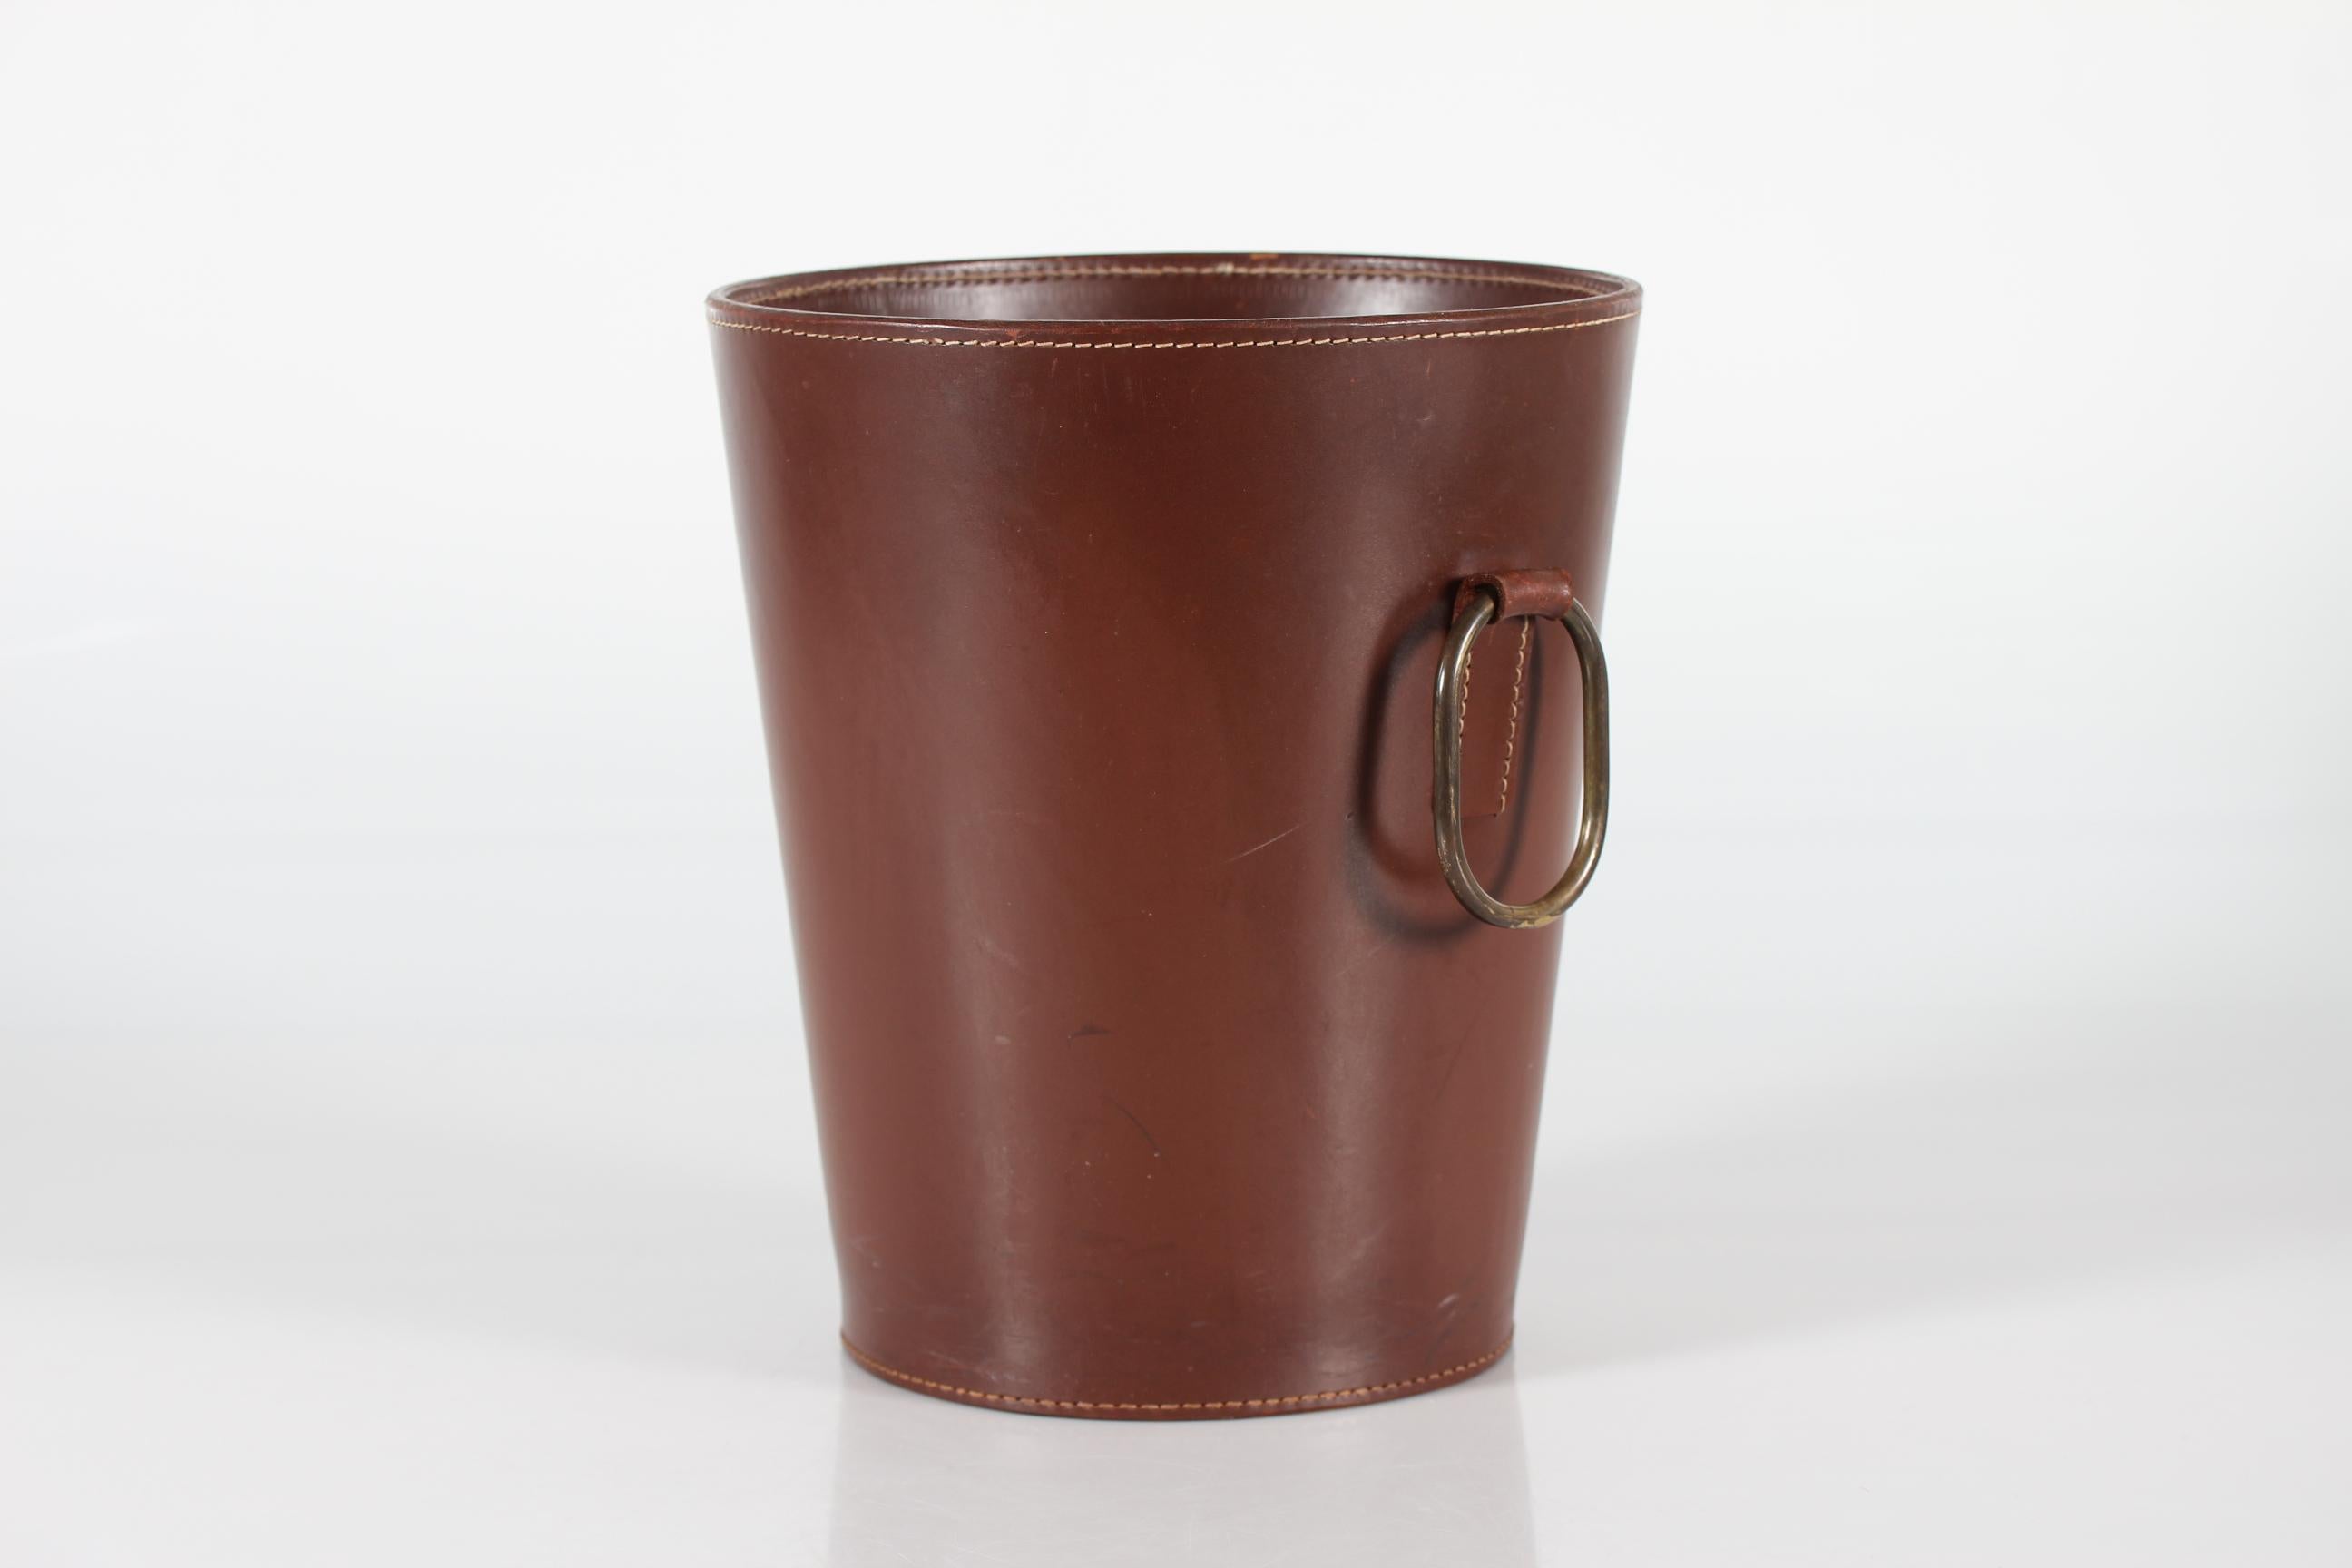 Round European vintage wastepaper basket from the 1970´s by Carl Auböck made for Illums Bolighus in Copenhagen.
It's made of strong genuine dark brown cognac colored core leather with visible stitching and ring shaped handle of brass.
It remains in